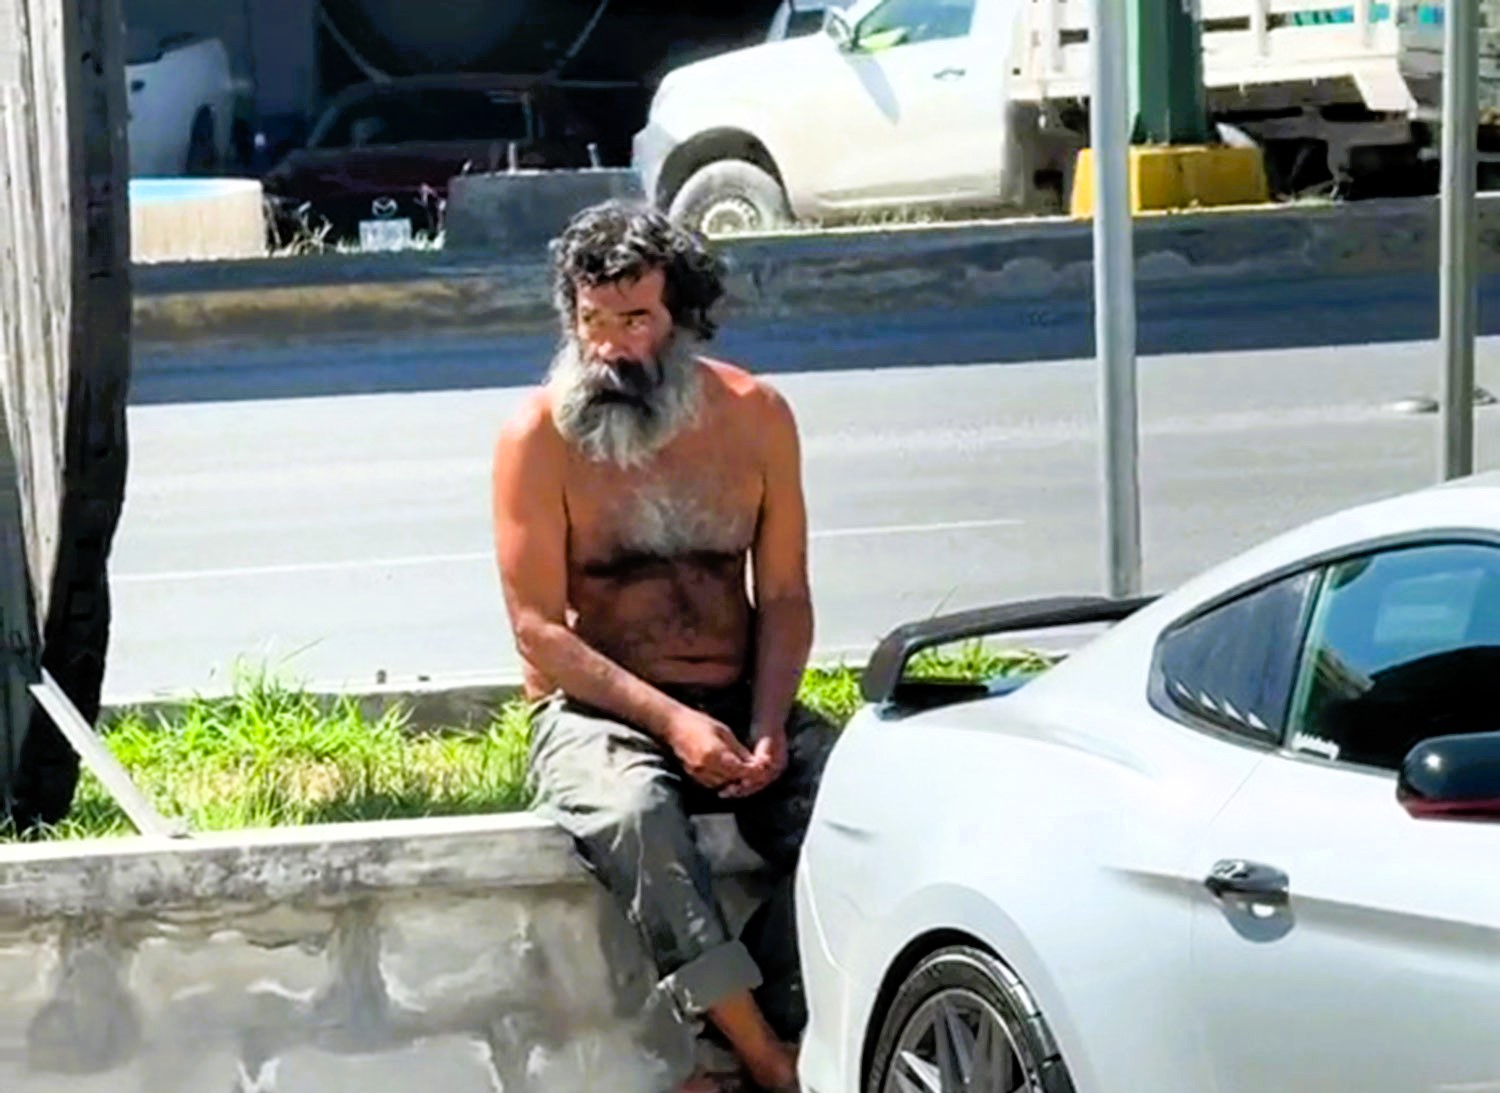 A homeless man admires a Ford Mustang, leading to a heartwarming reunion with his family after 13 years, all thanks to a TikToker's viral videos.